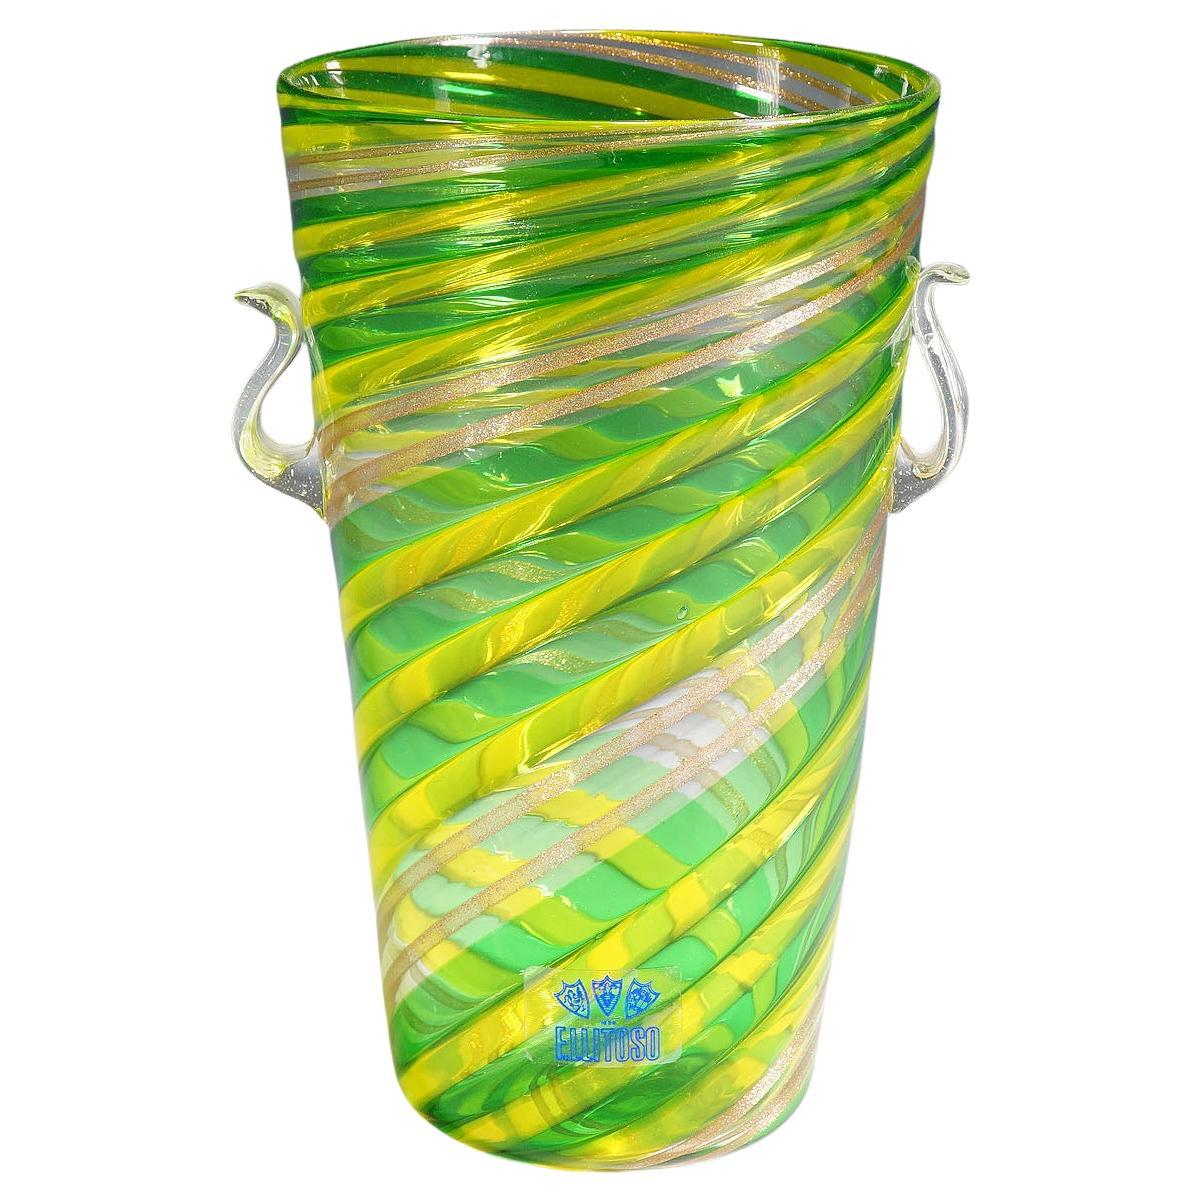 Fratelli Toso 'A Canne' Vase with Aventurin, Murano, Italy ca. 1965